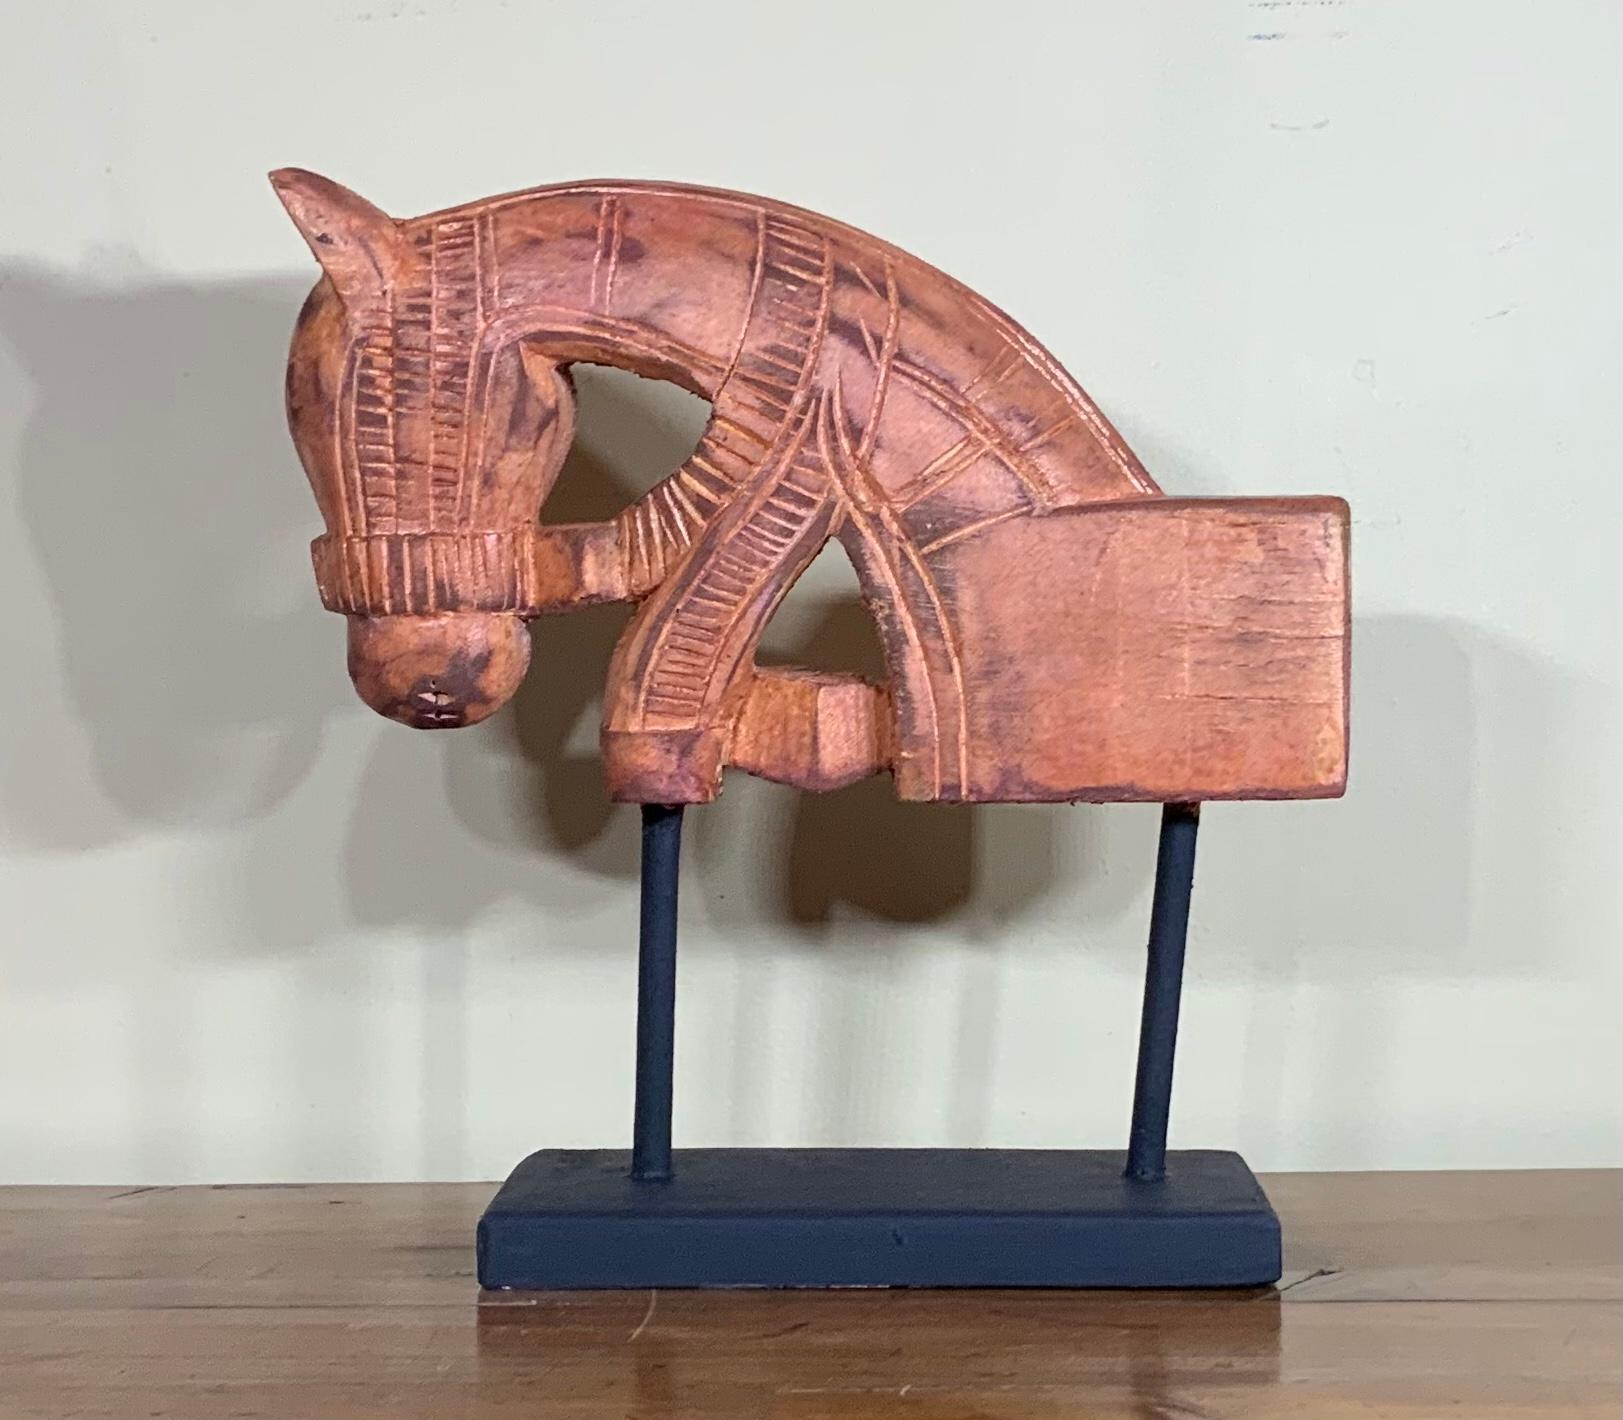 Architectural Hand Carved Wood Horse For Sale 7